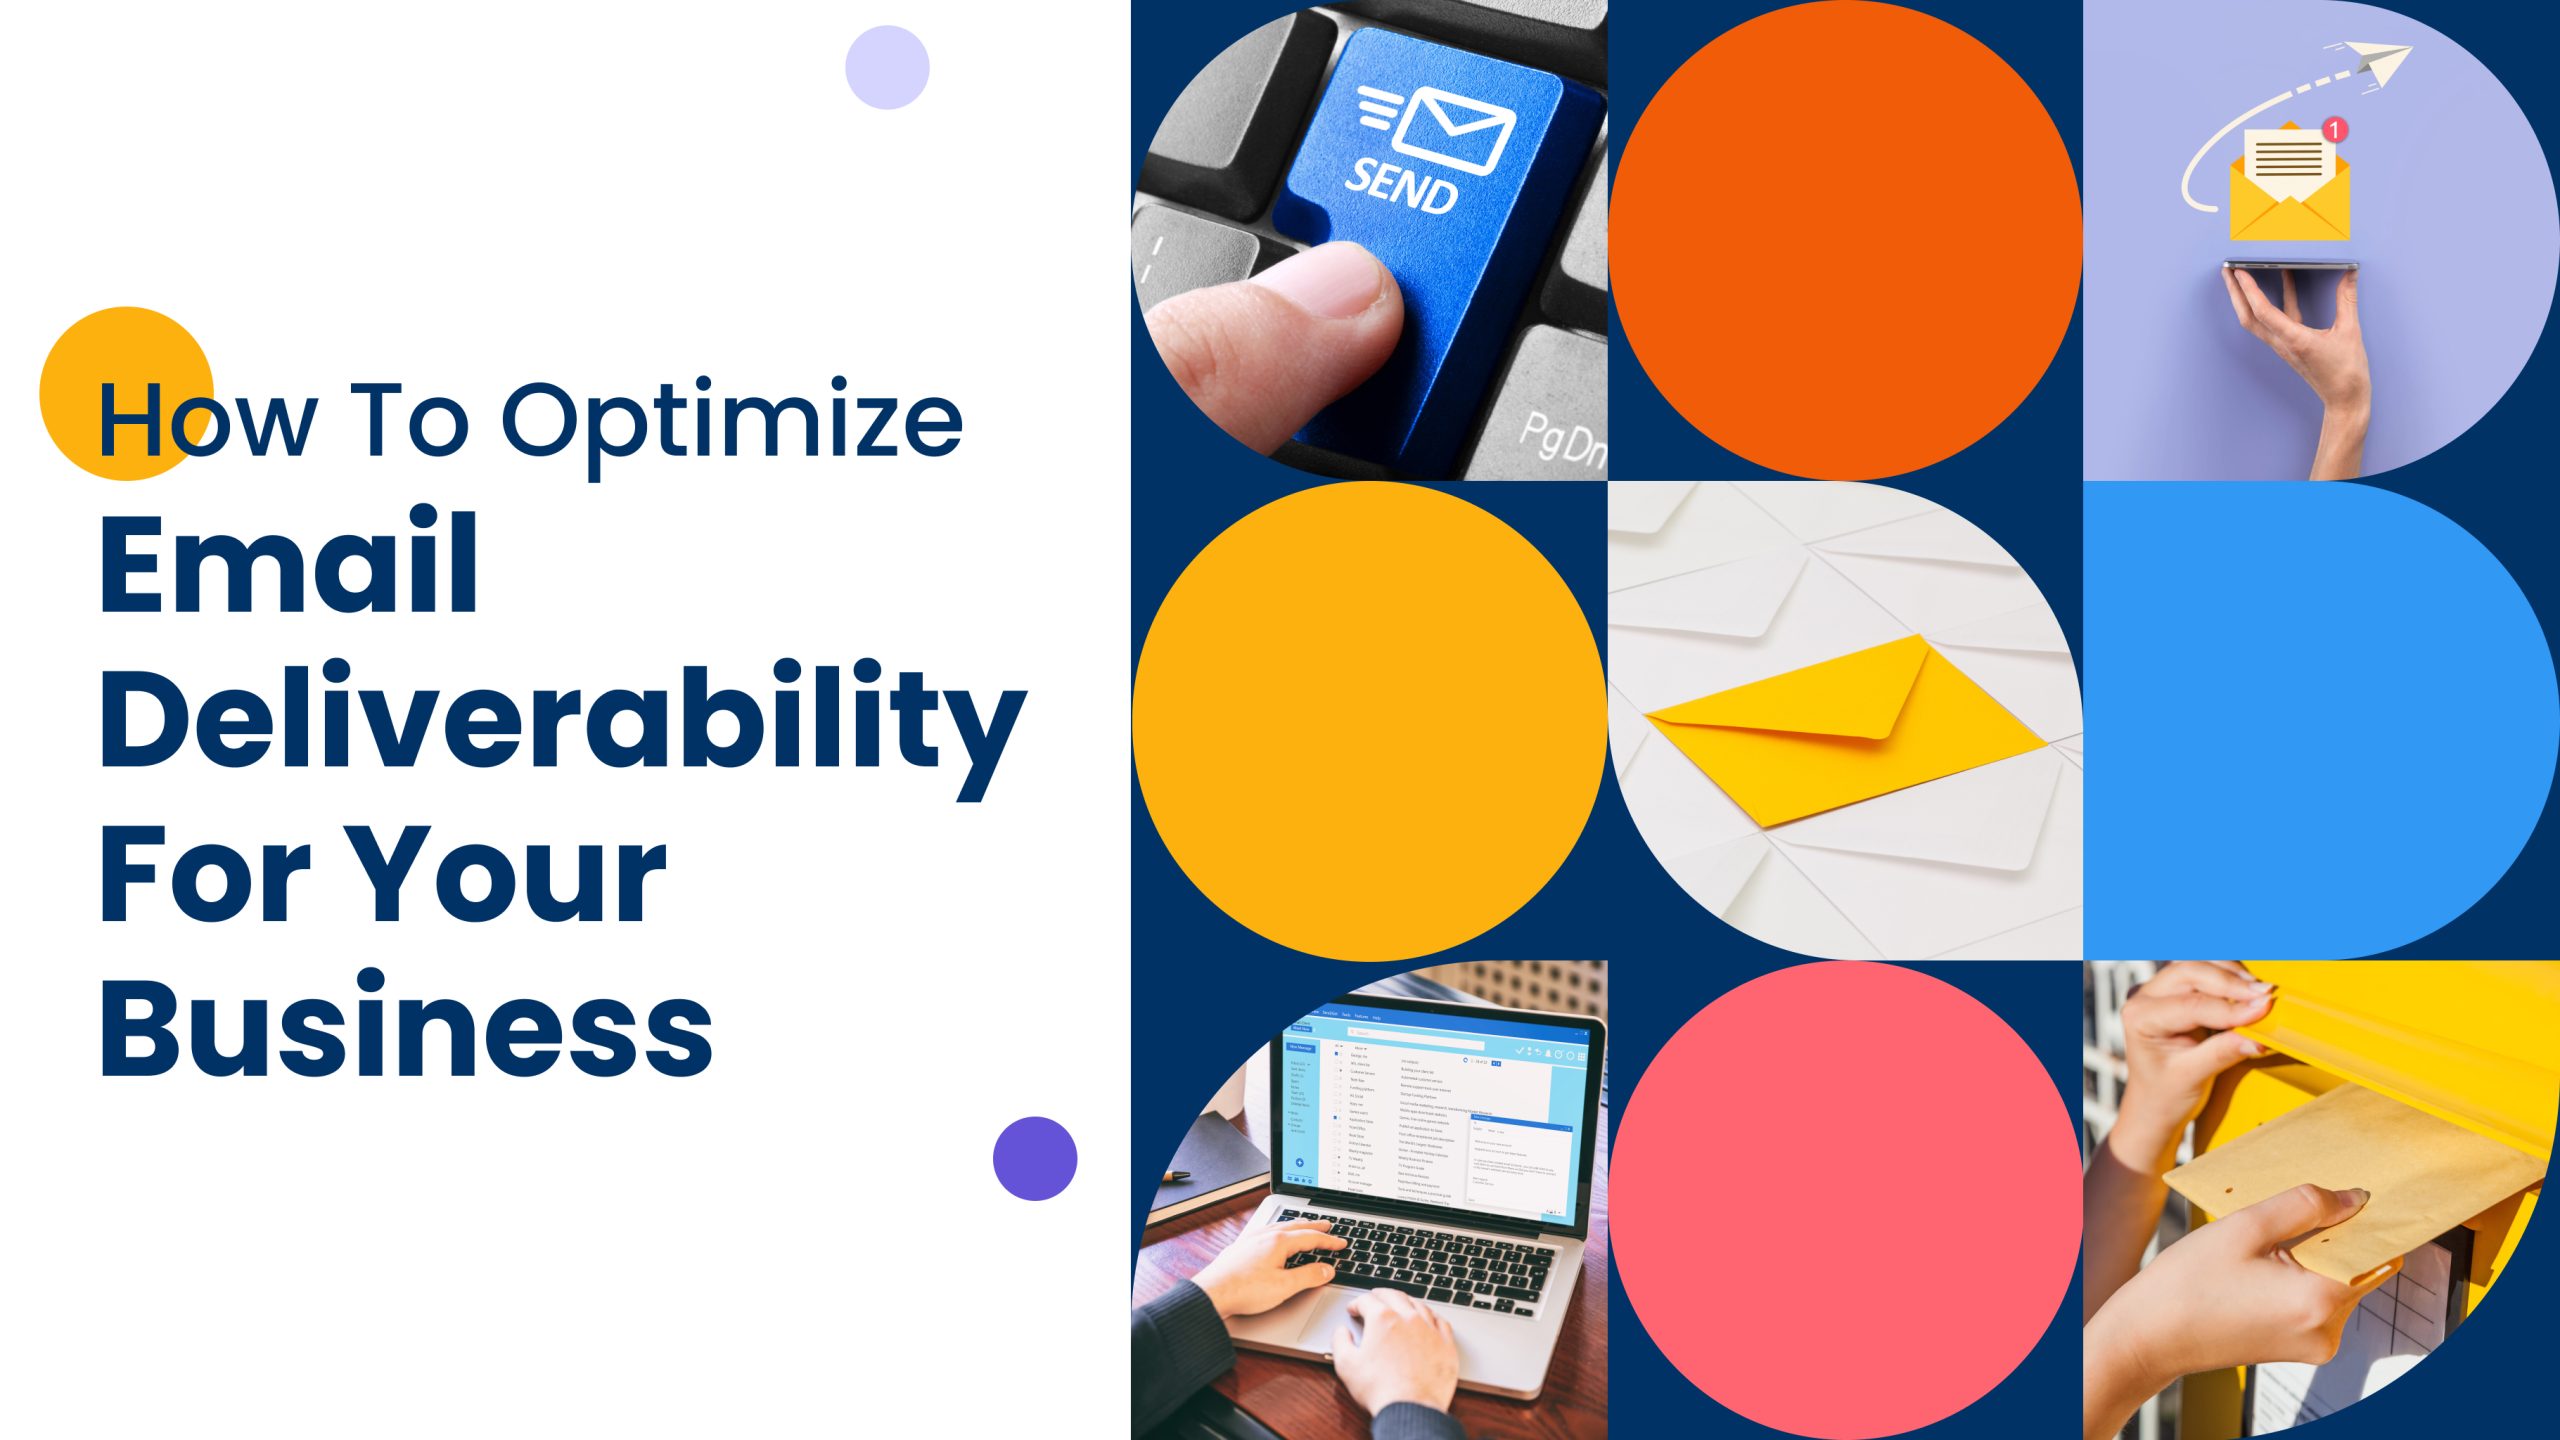 How To Optimize Email Deliverability For Your Business